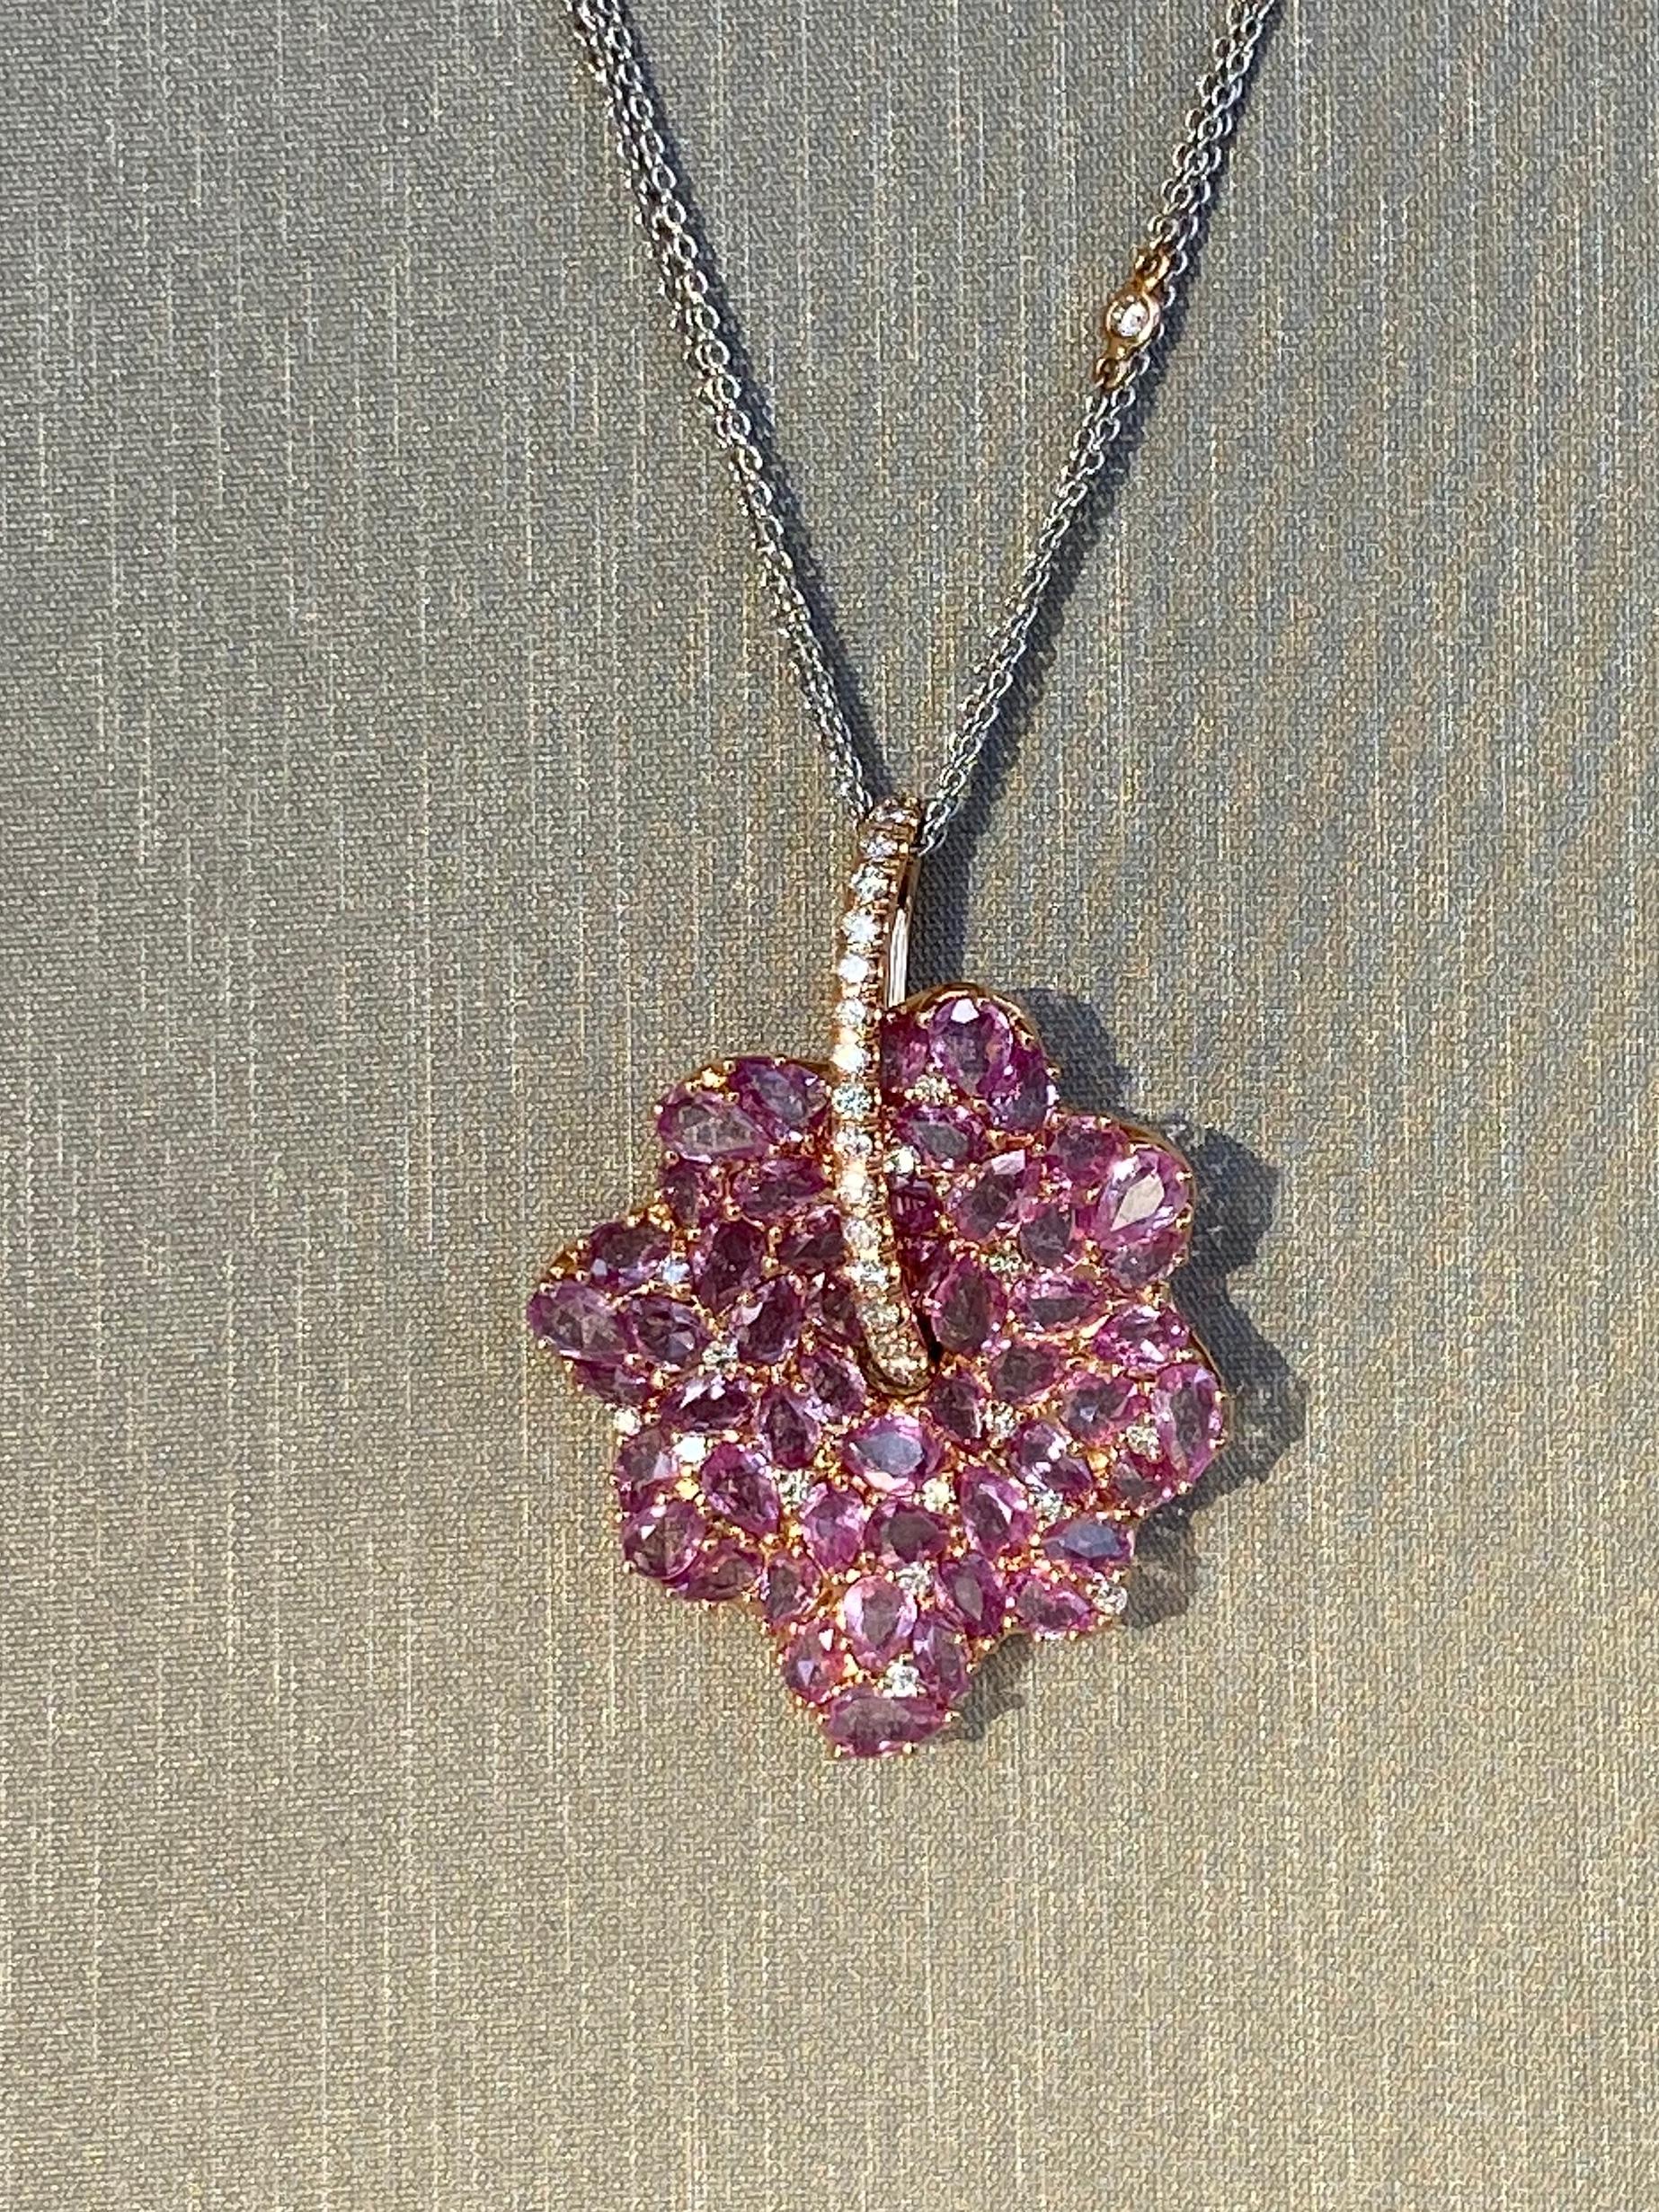 Pink Sapphire And Diamond Pendant Necklace.   This one of a kind chain necklace has 7.96 carats of Freeform Single Cut Sapphires and  .49 carats of Brilliant round cut Diamonds, F-G color and VS clarity, all set into 18 karat rose gold.  Free-form